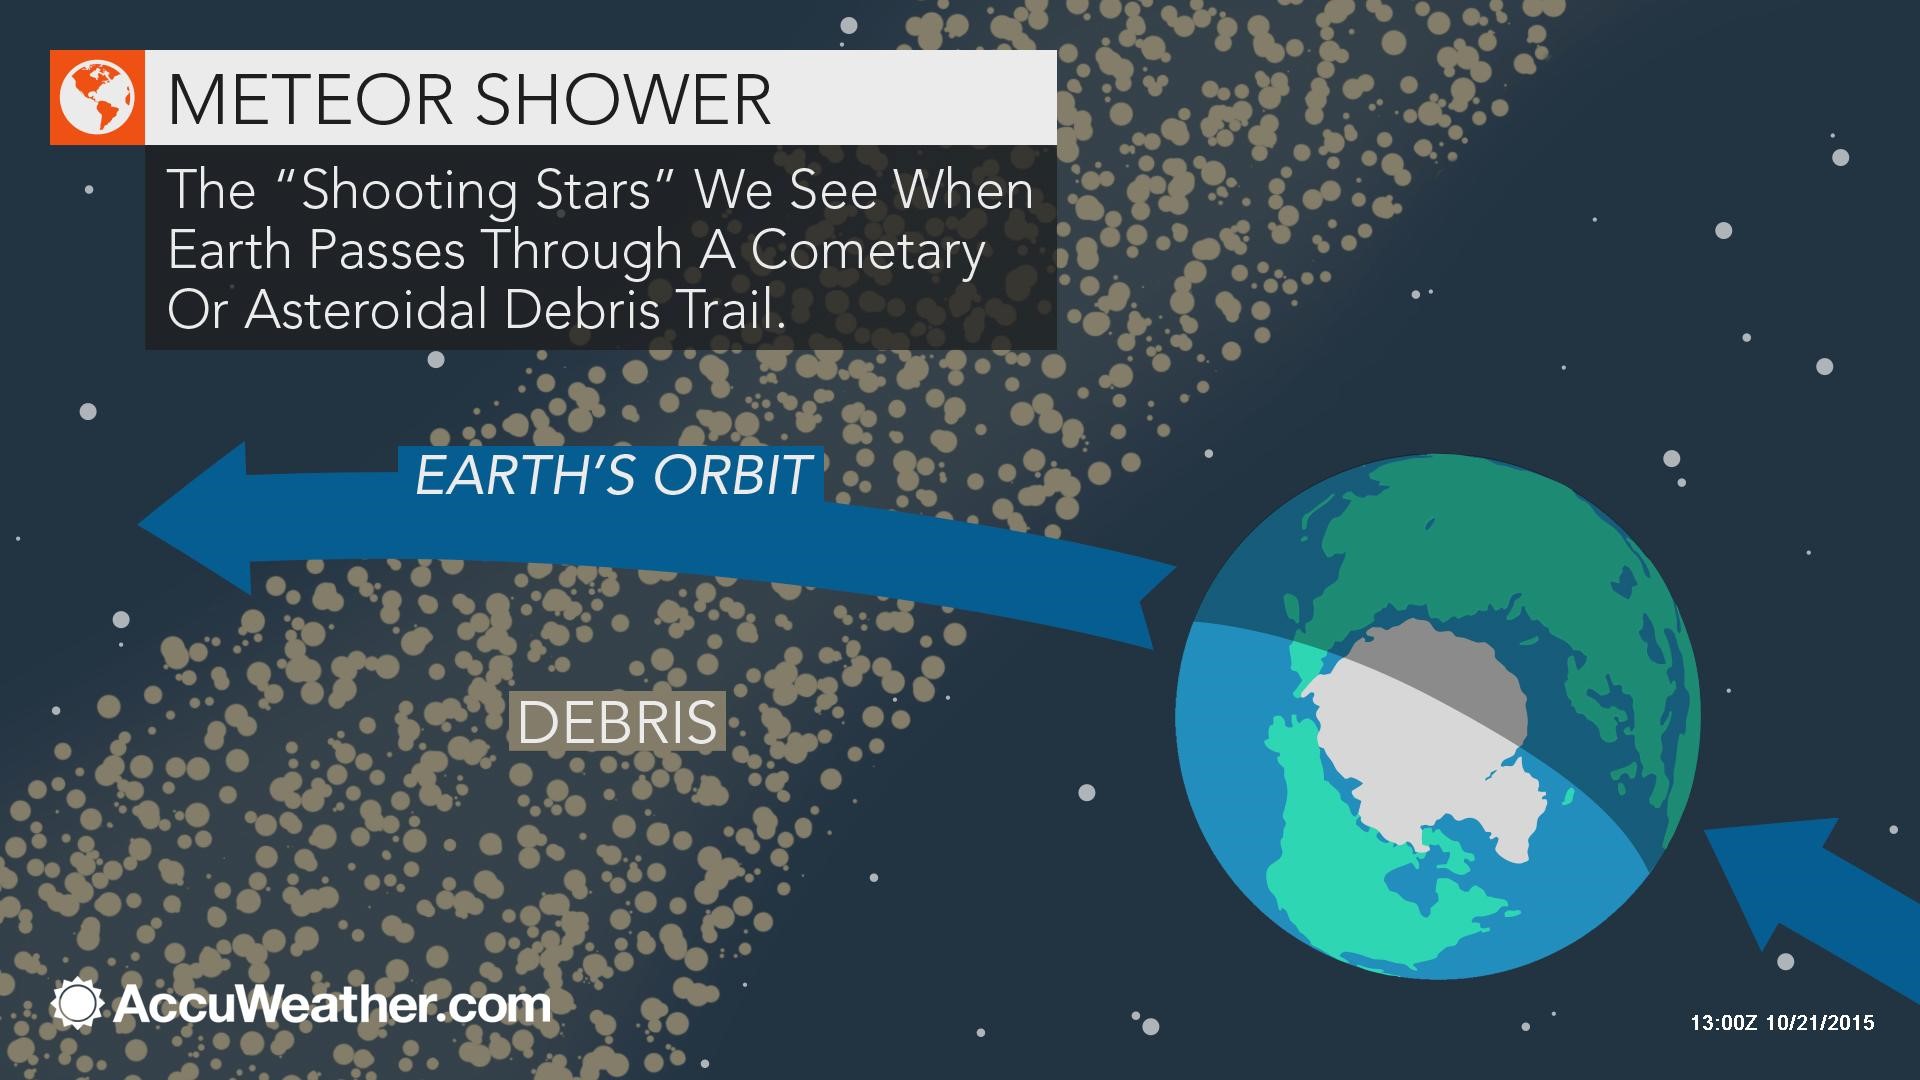 There's still time to see the Eta Aquarid meteor shower